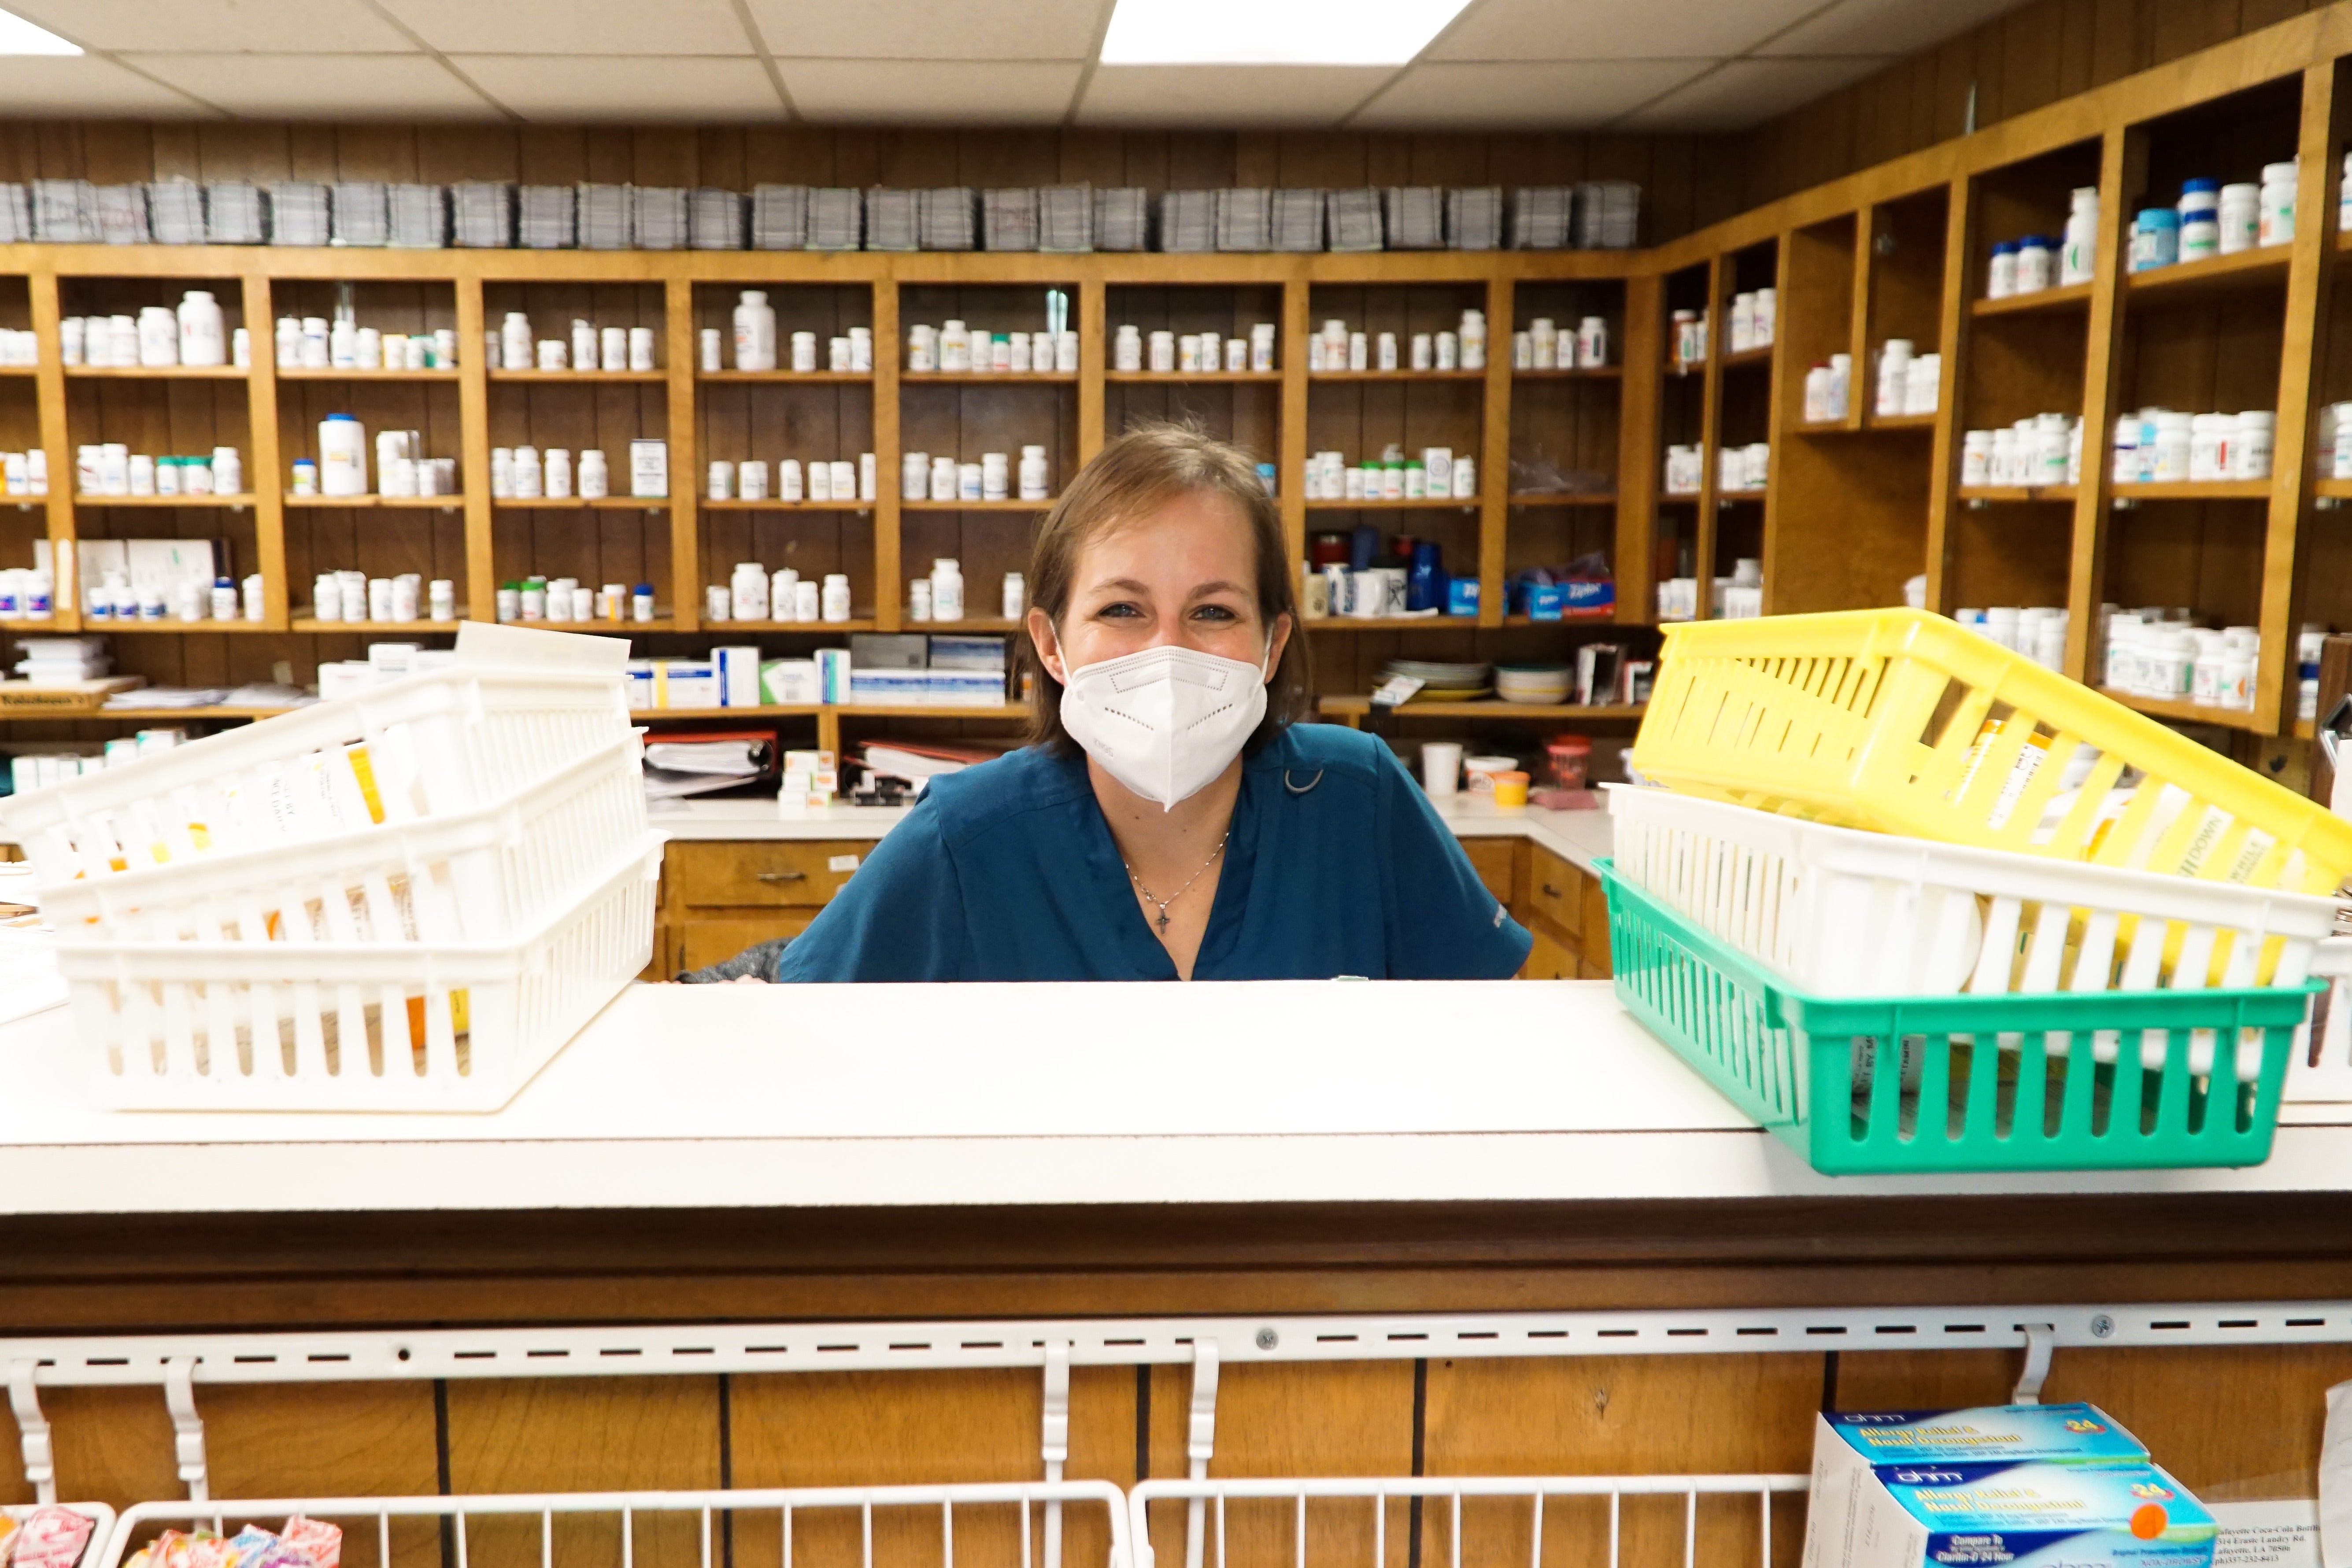 Courtney Pitre has operated Courtney's Thriftway Pharmacy in rural Arnaudville, La., for eight years. She said the coronavirus pandemic has turned her business on its head and run her ragged with work.